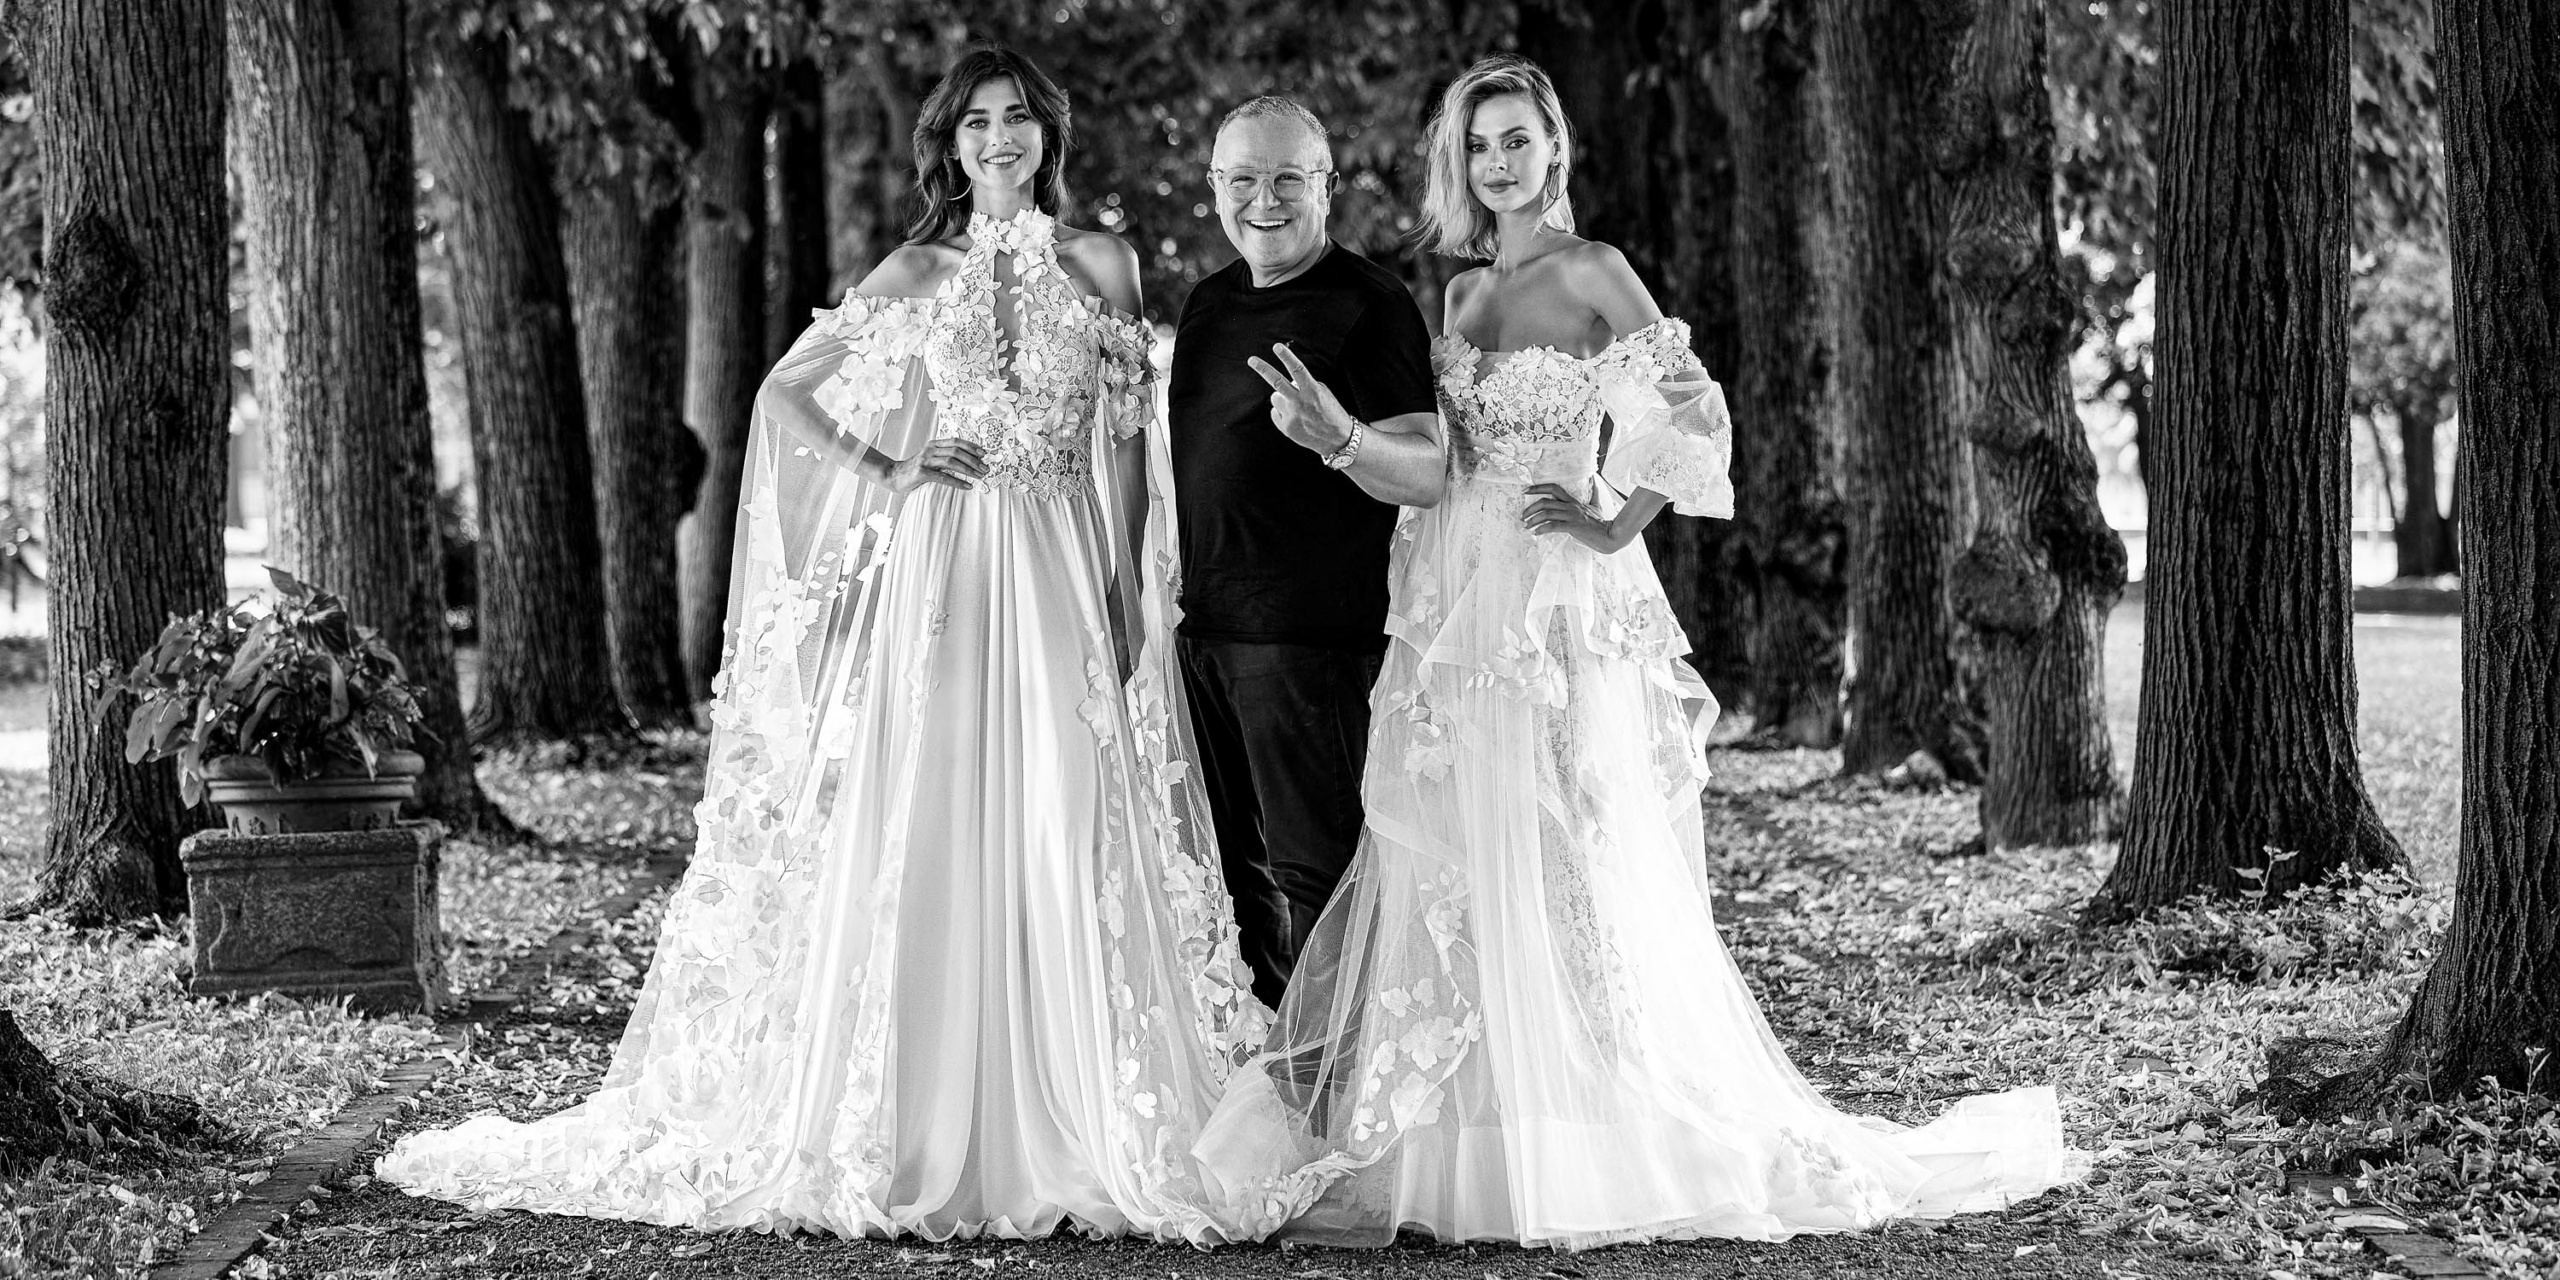 Stylist Stefano Blandaleone: A Master of Great Beauty - Between Art and Style for a Fabulous Wedding - Made in Italy Wedding Dresses for a Vogue Style Look